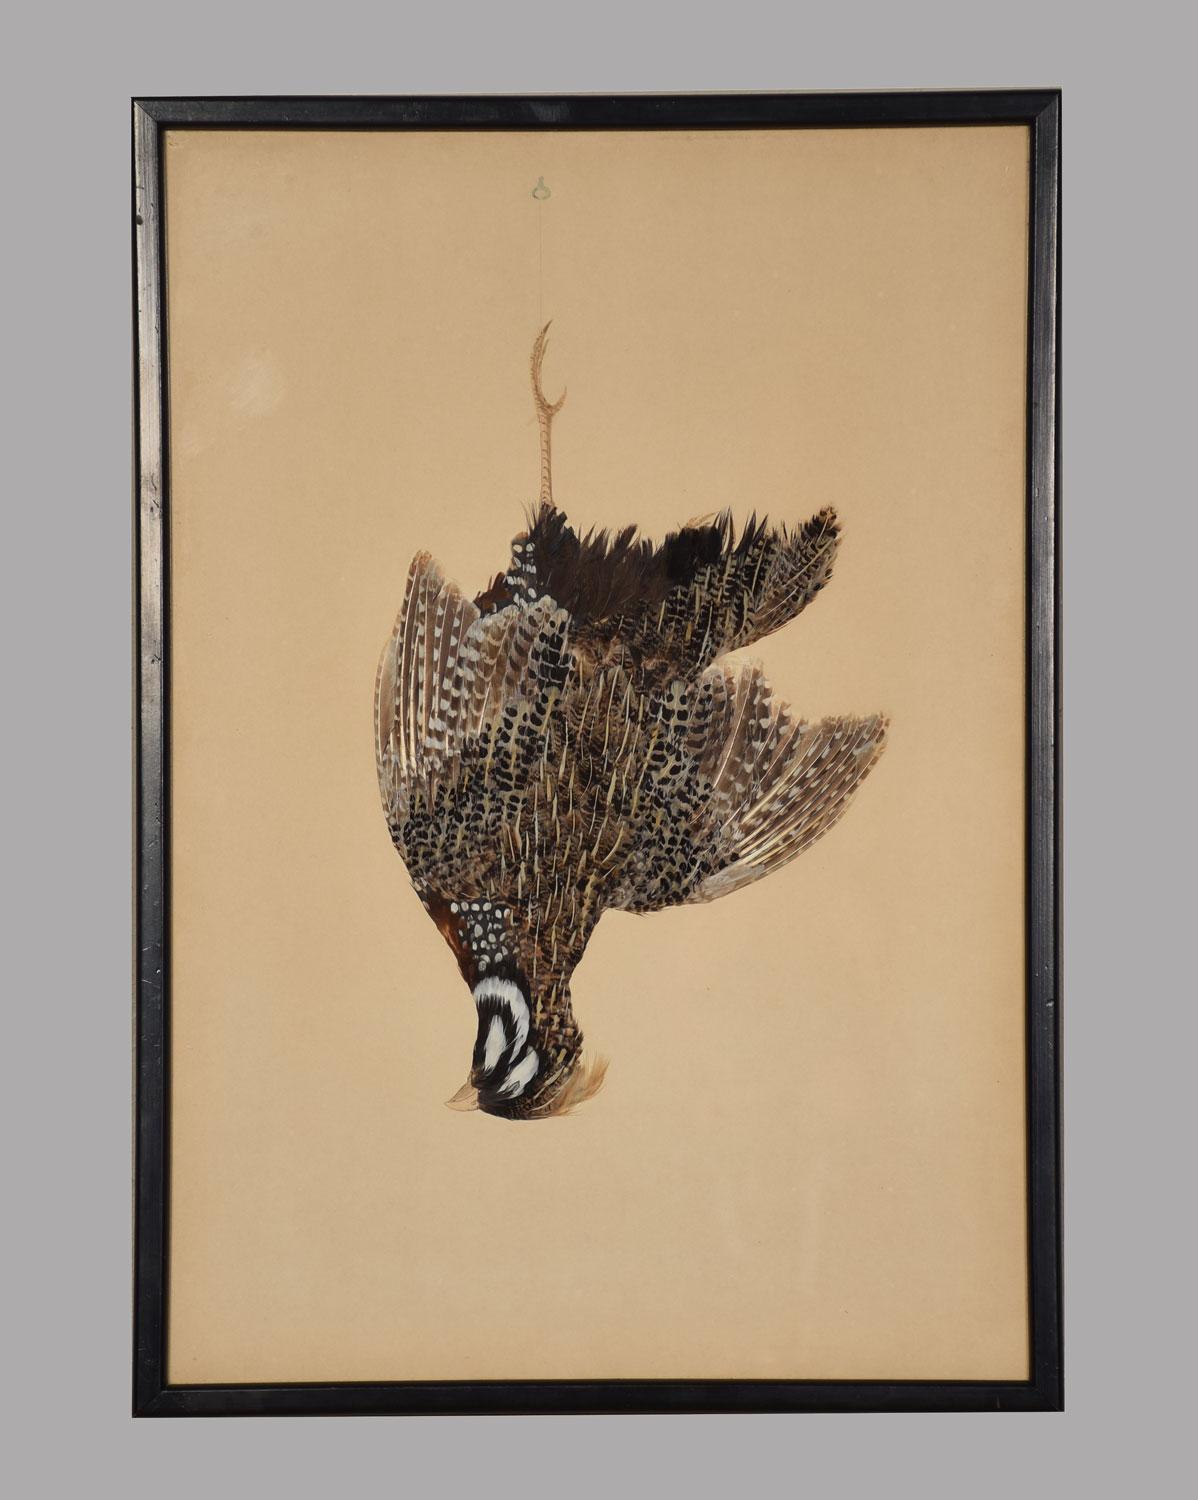 A set of four feather pictures of hanging game birds in the style of Michelangelo Meucci, composed of feathers, the beaks and legs in watercolour. Encased in ebonies frames.
Dimensions
Height 19 Inches
Width 13 Inches
Depth 0.5 Inches